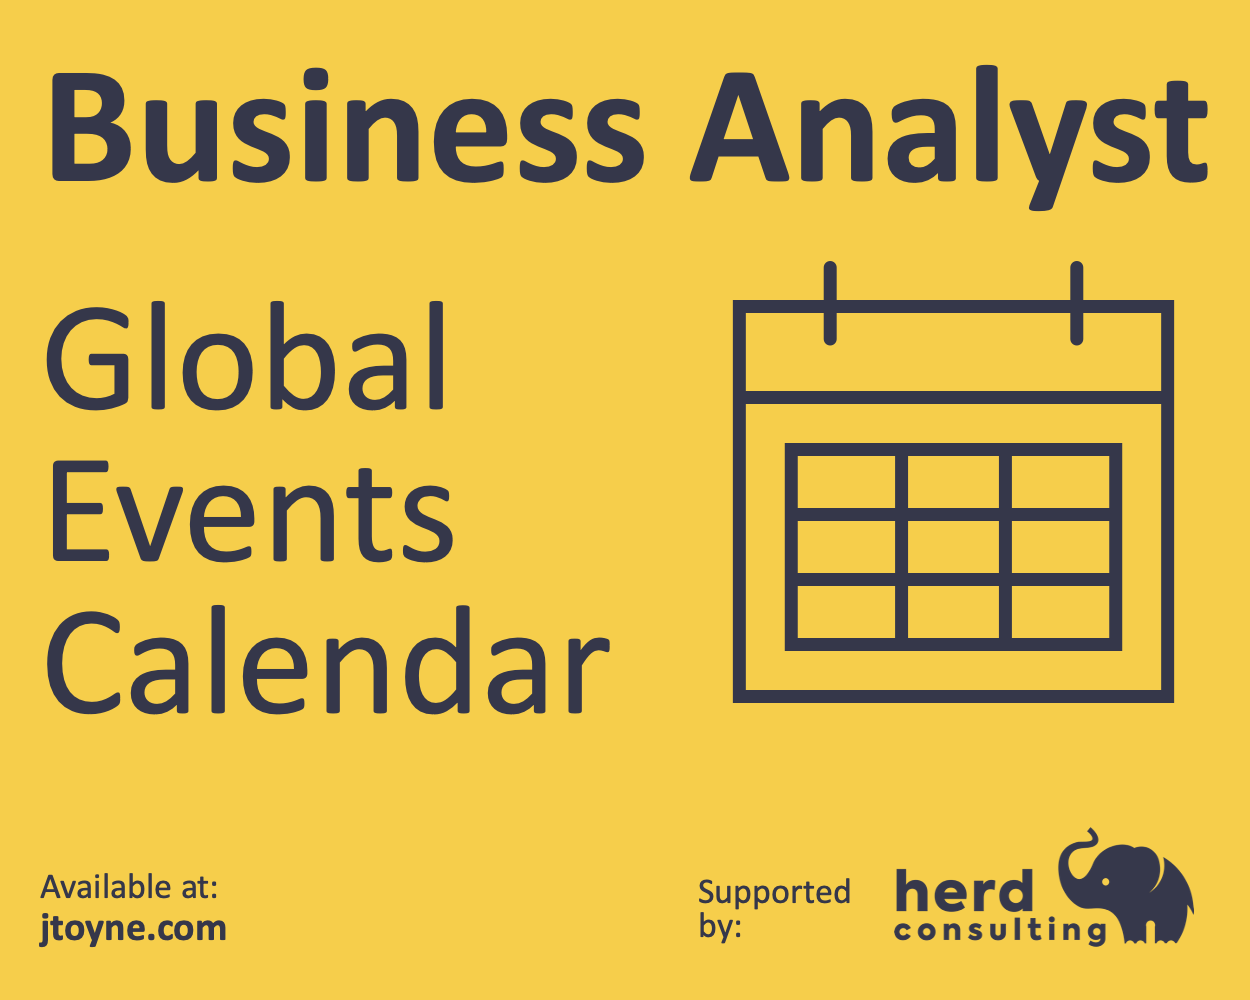 BA Global Events Calendar, supported by Herd Consulting